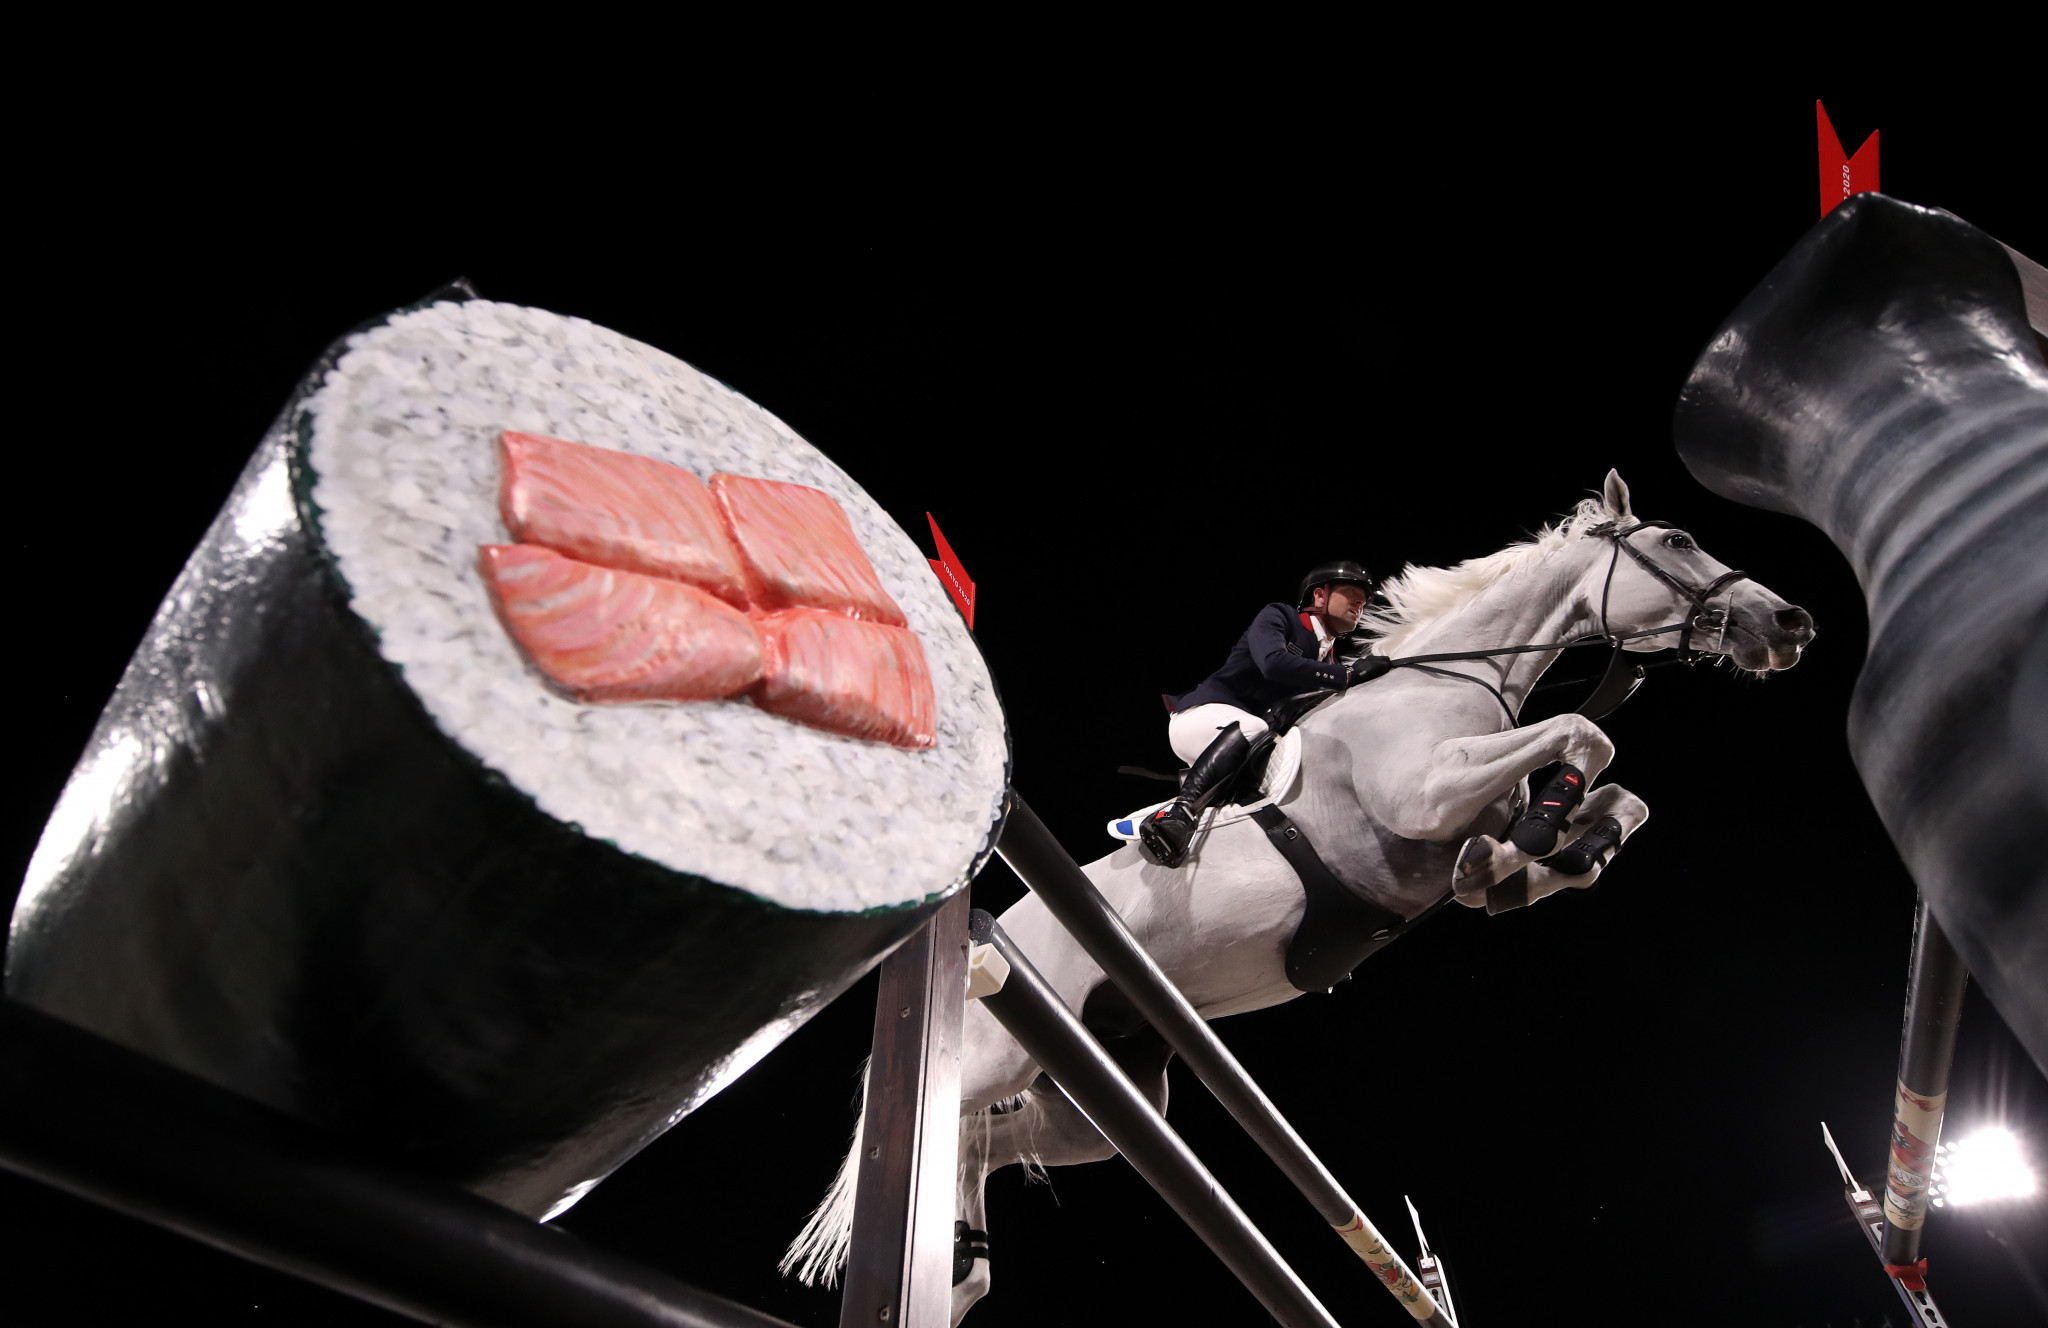 GL Events to plan and deliver Paris 2024 equestrian events